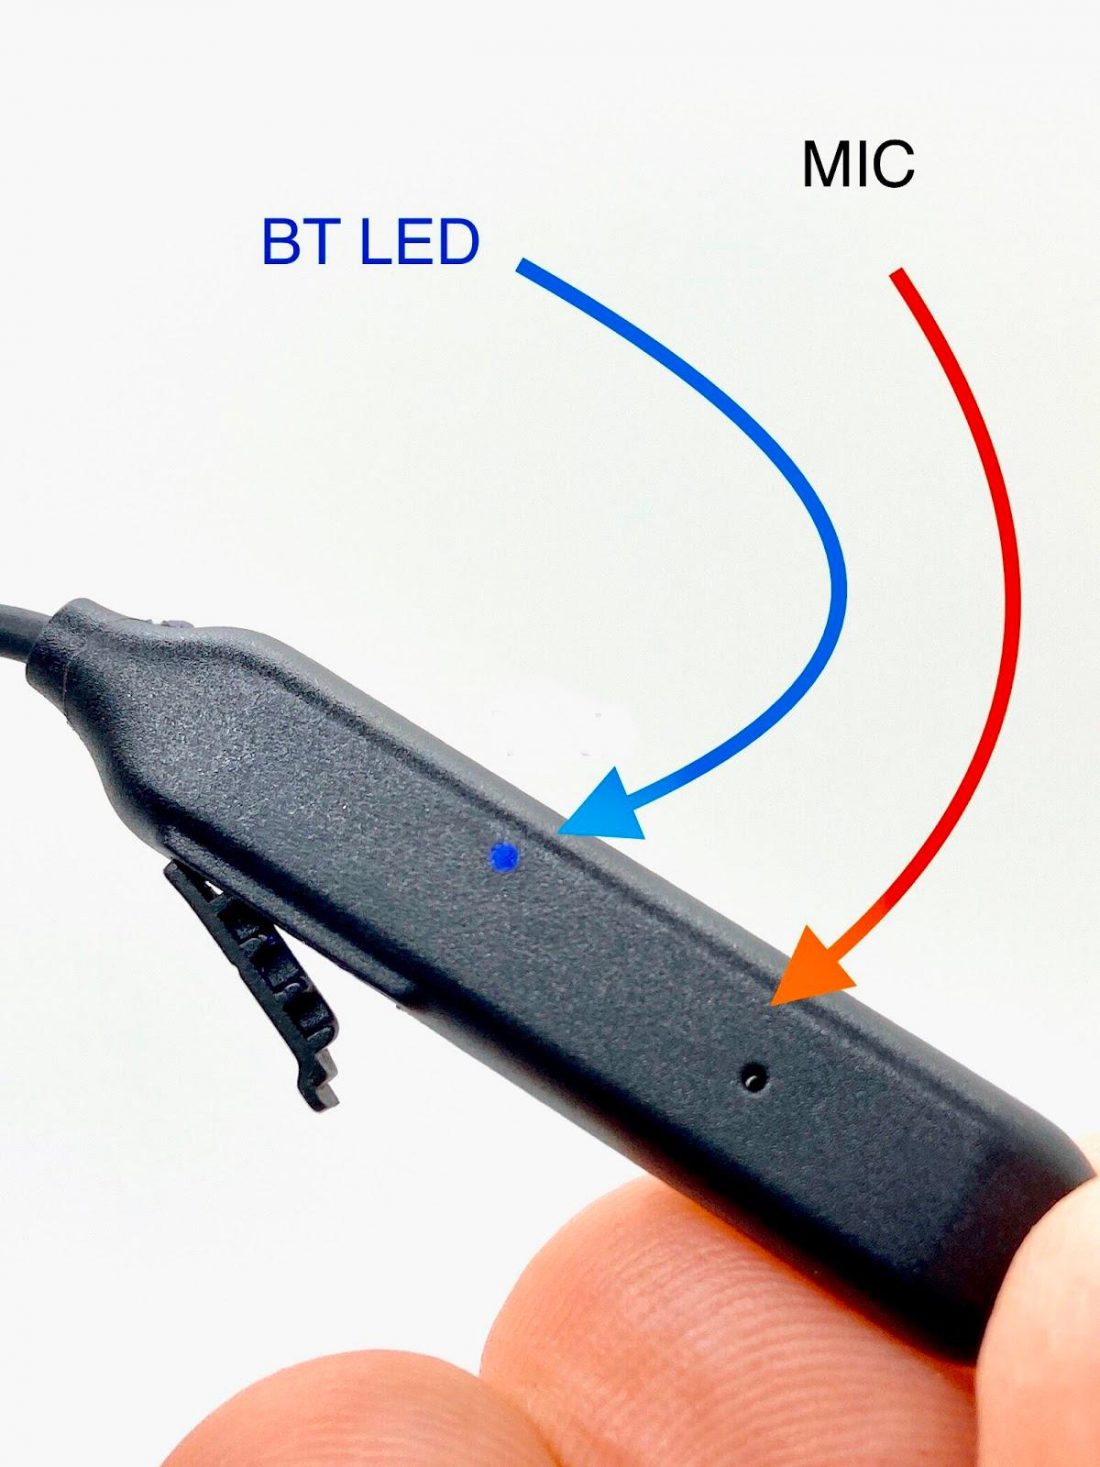 Bluetooth LED and microphone locations.